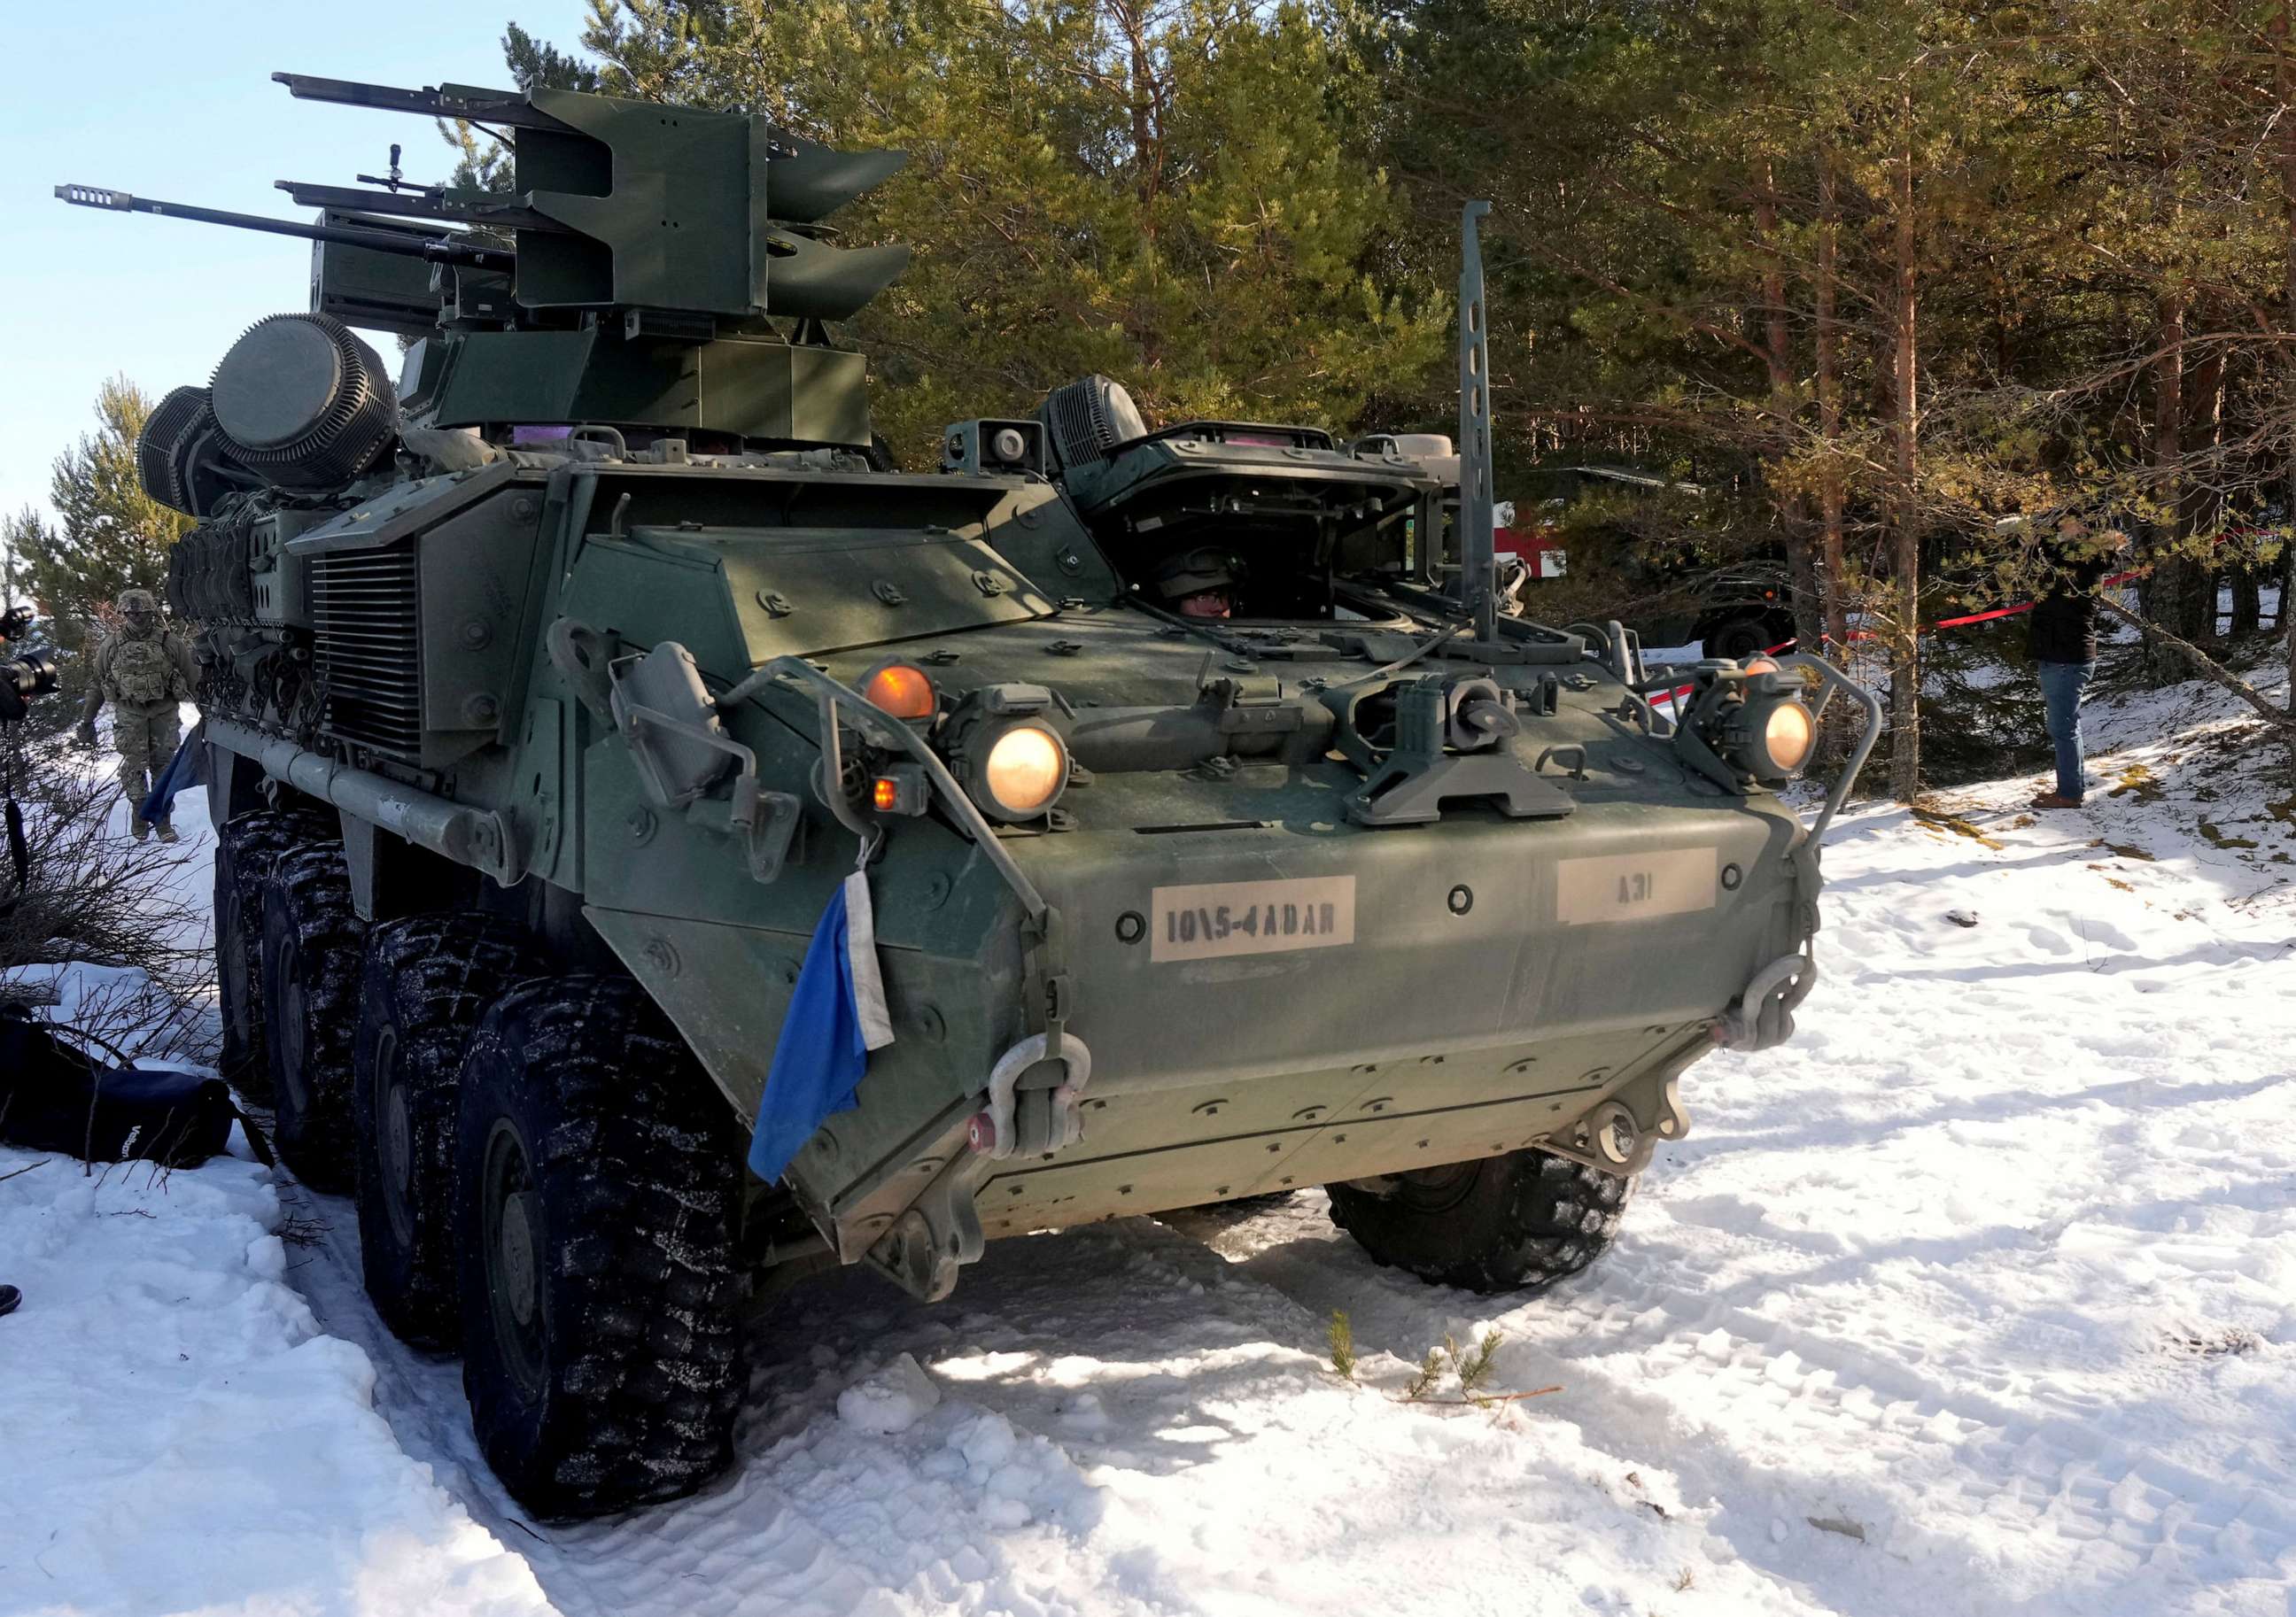 PHOTO: U.S. troops prepare to fire Stinger missiles from their Stryker armored fighting vehicle during Saber Strike military drill in Rutja, Estonia March 10, 2022.